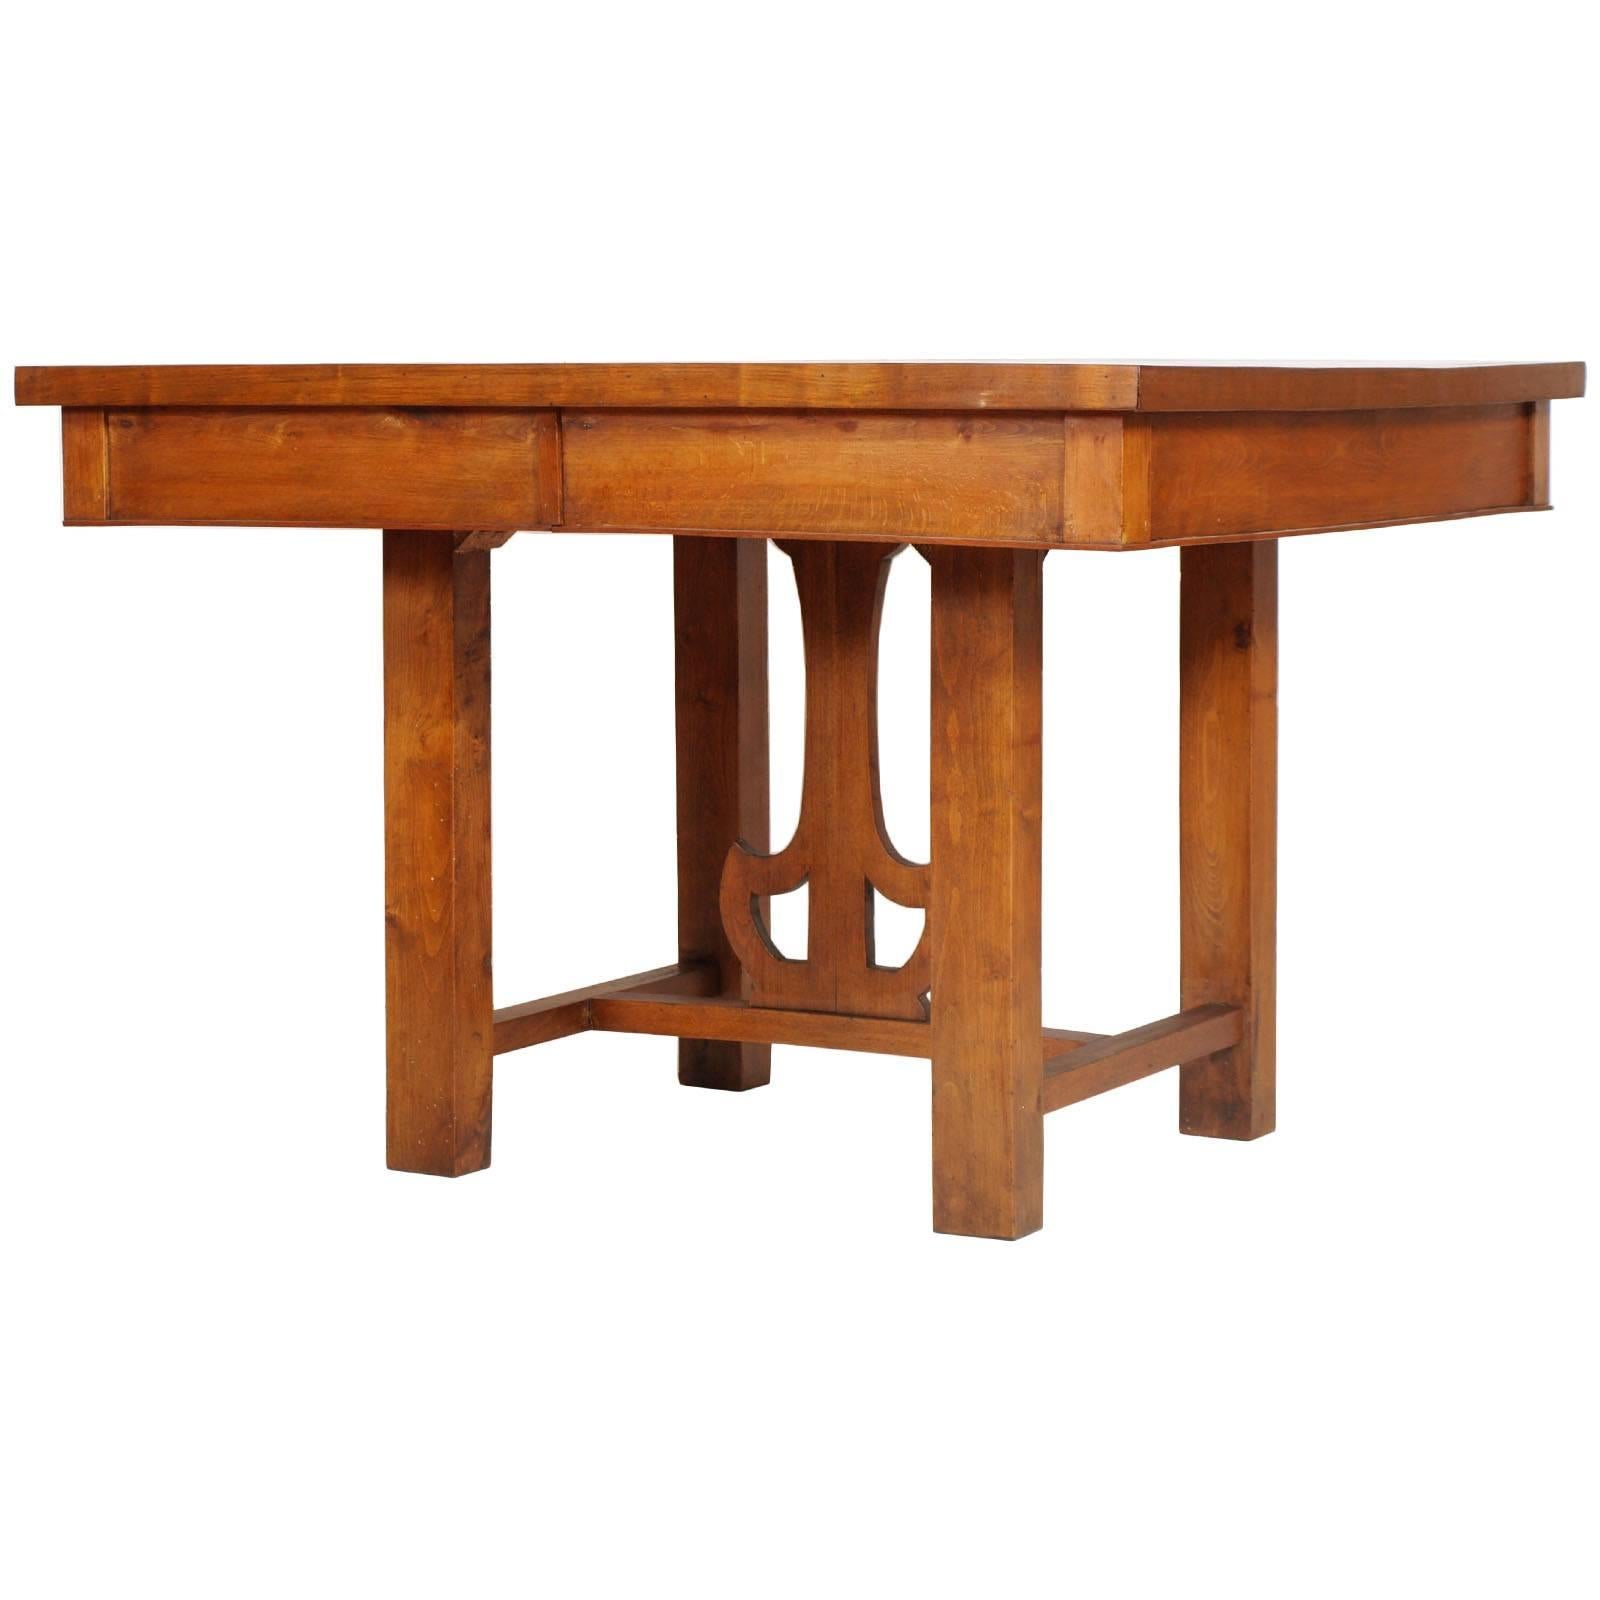 Austrian 1910s Tirolean Art Nouveau Table, Solid Larch and Fir Restored and Wax-Polished For Sale